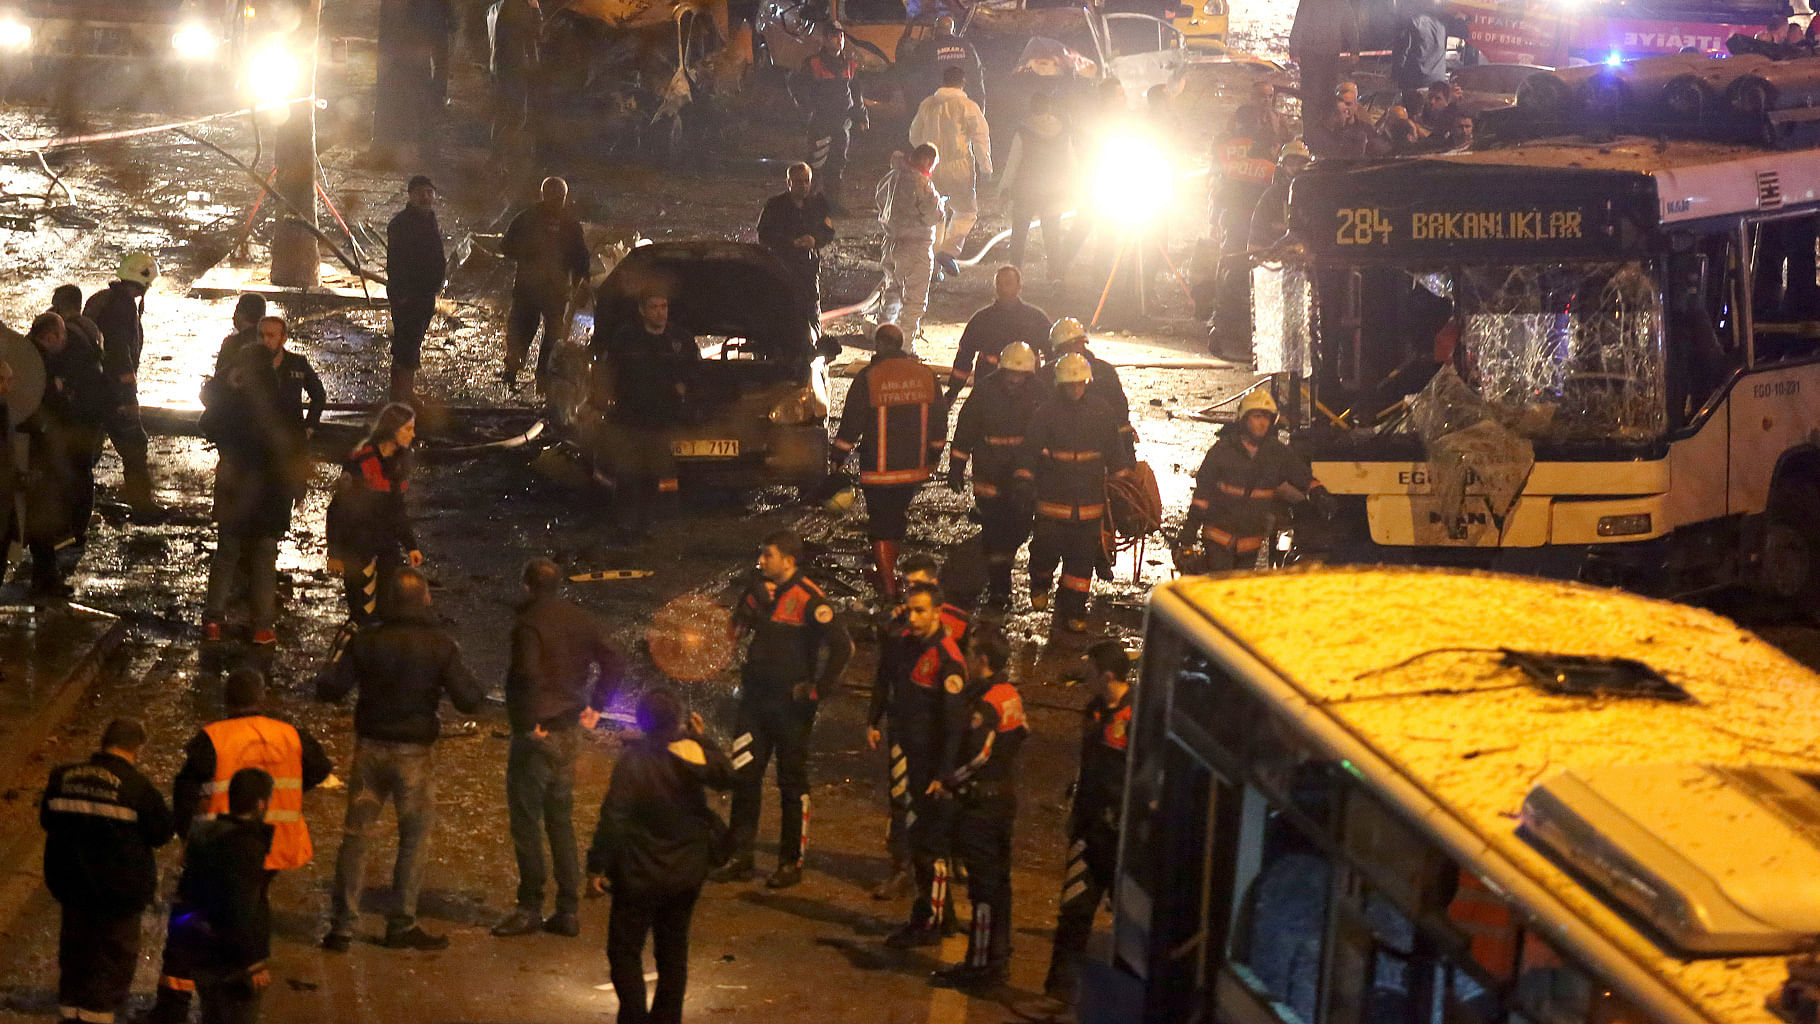 Members of emergency services work at the scene of an explosion in Ankara, Turkey. (Photo: AP)